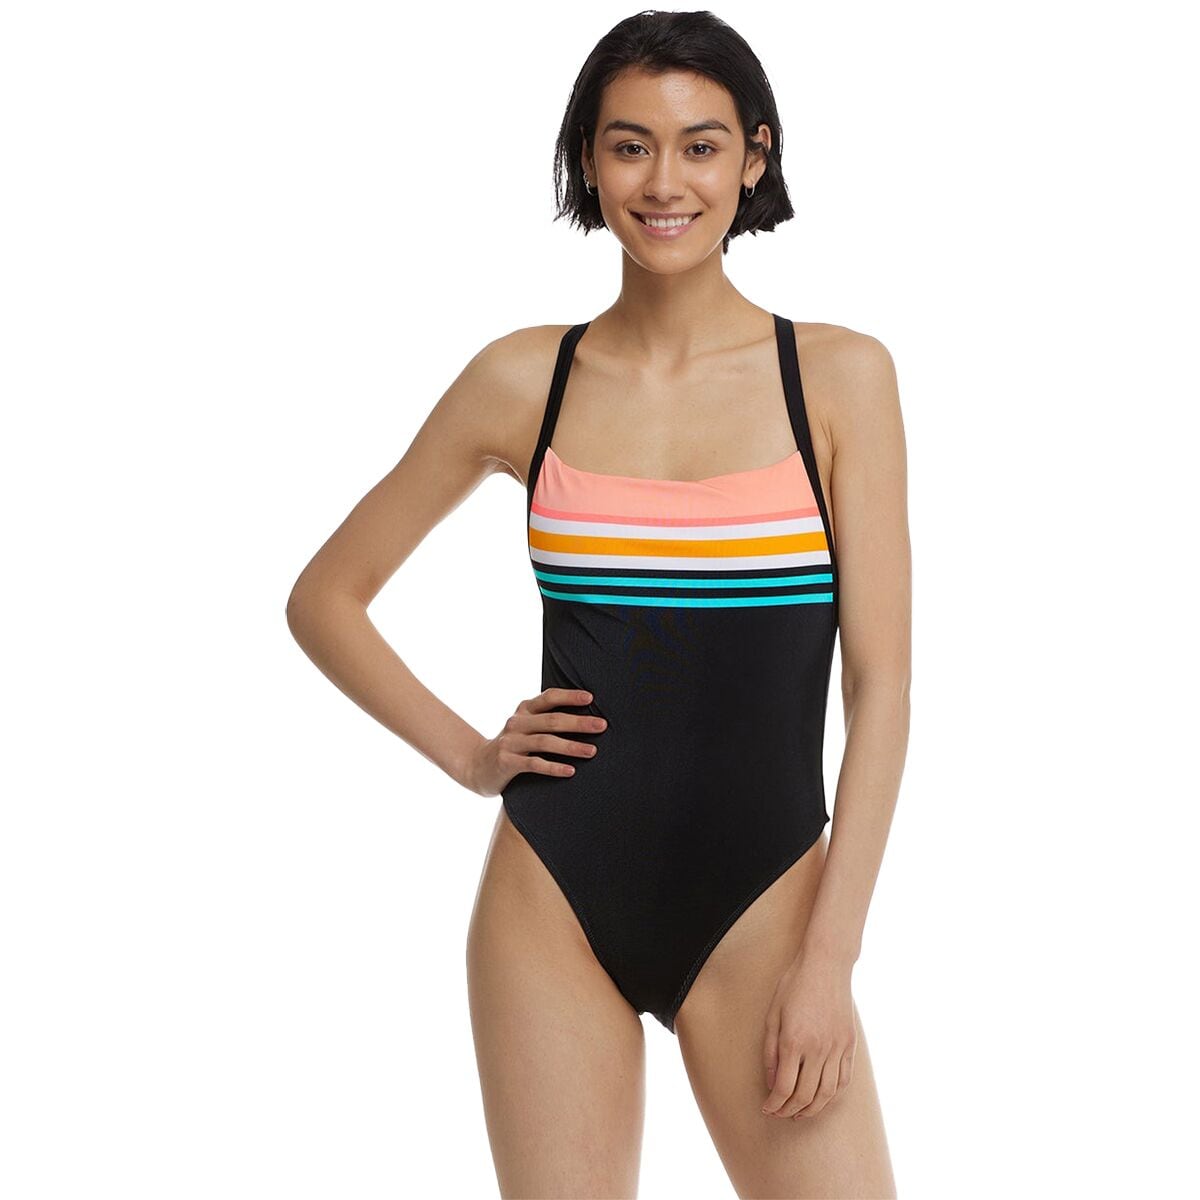 Body Glove Coral Reef Electra One-Piece Swimsuit - Women's